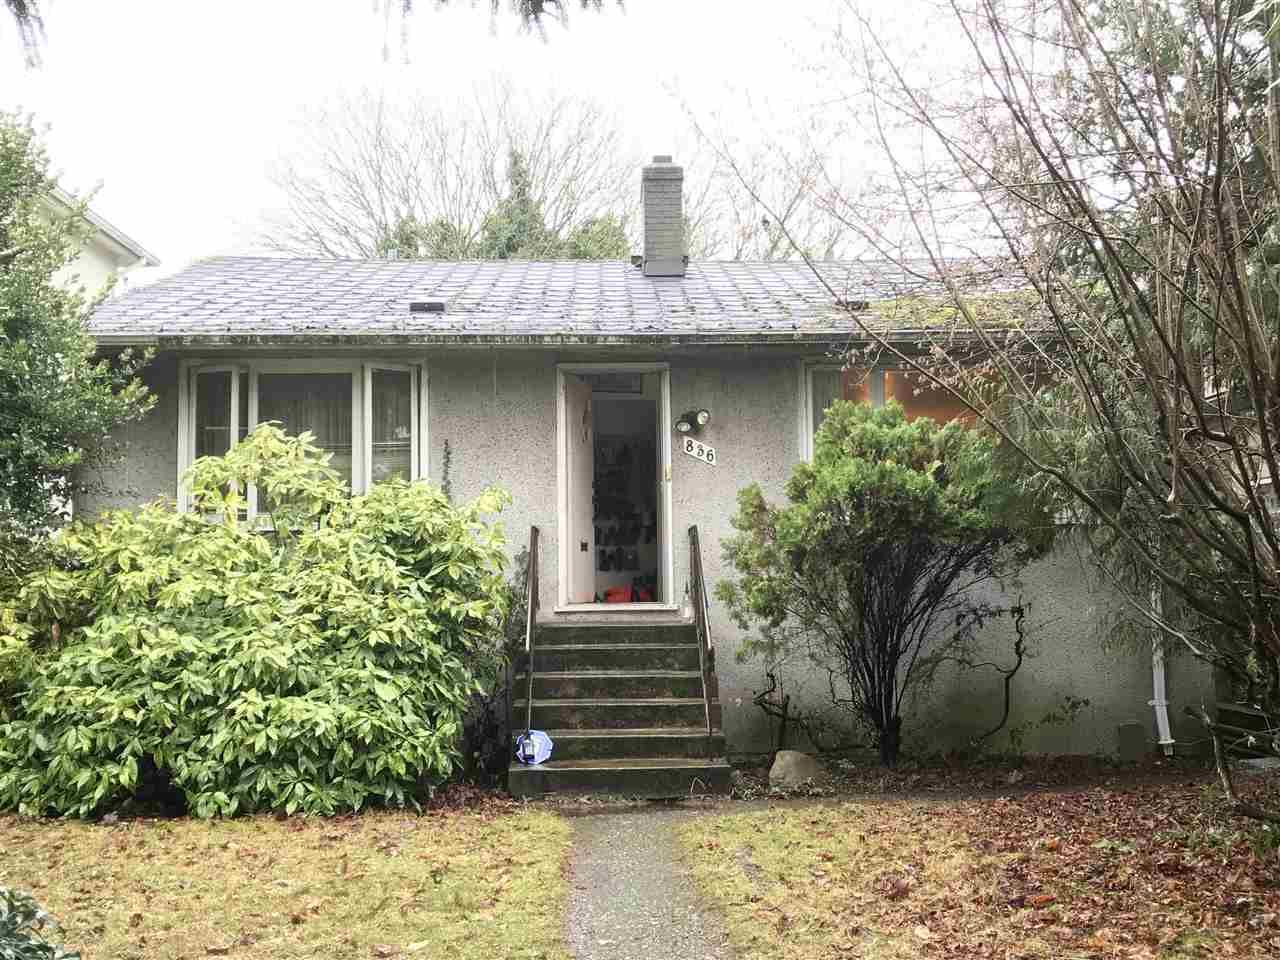 Main Photo: 836 W 66TH AVENUE in : Marpole House for sale : MLS®# R2229896